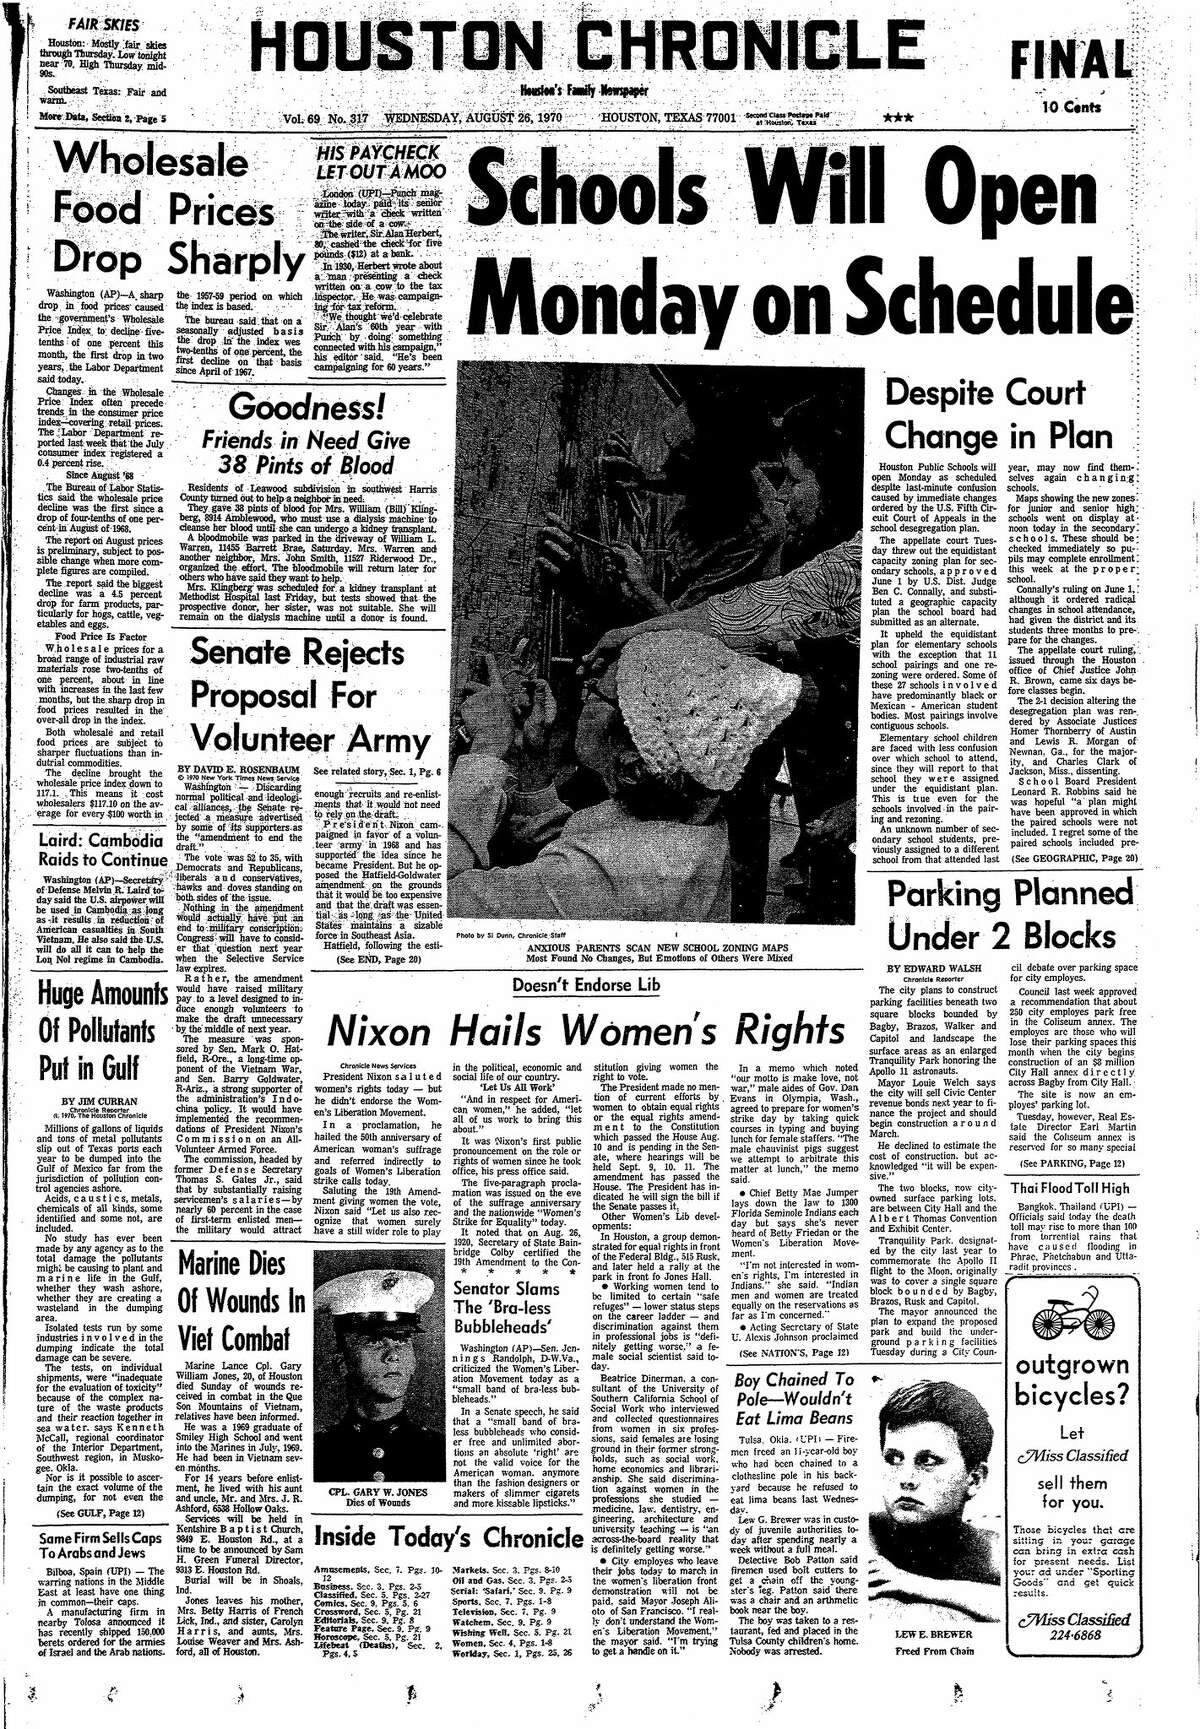 Houston Chronicle front page for Aug. 26, 1970.